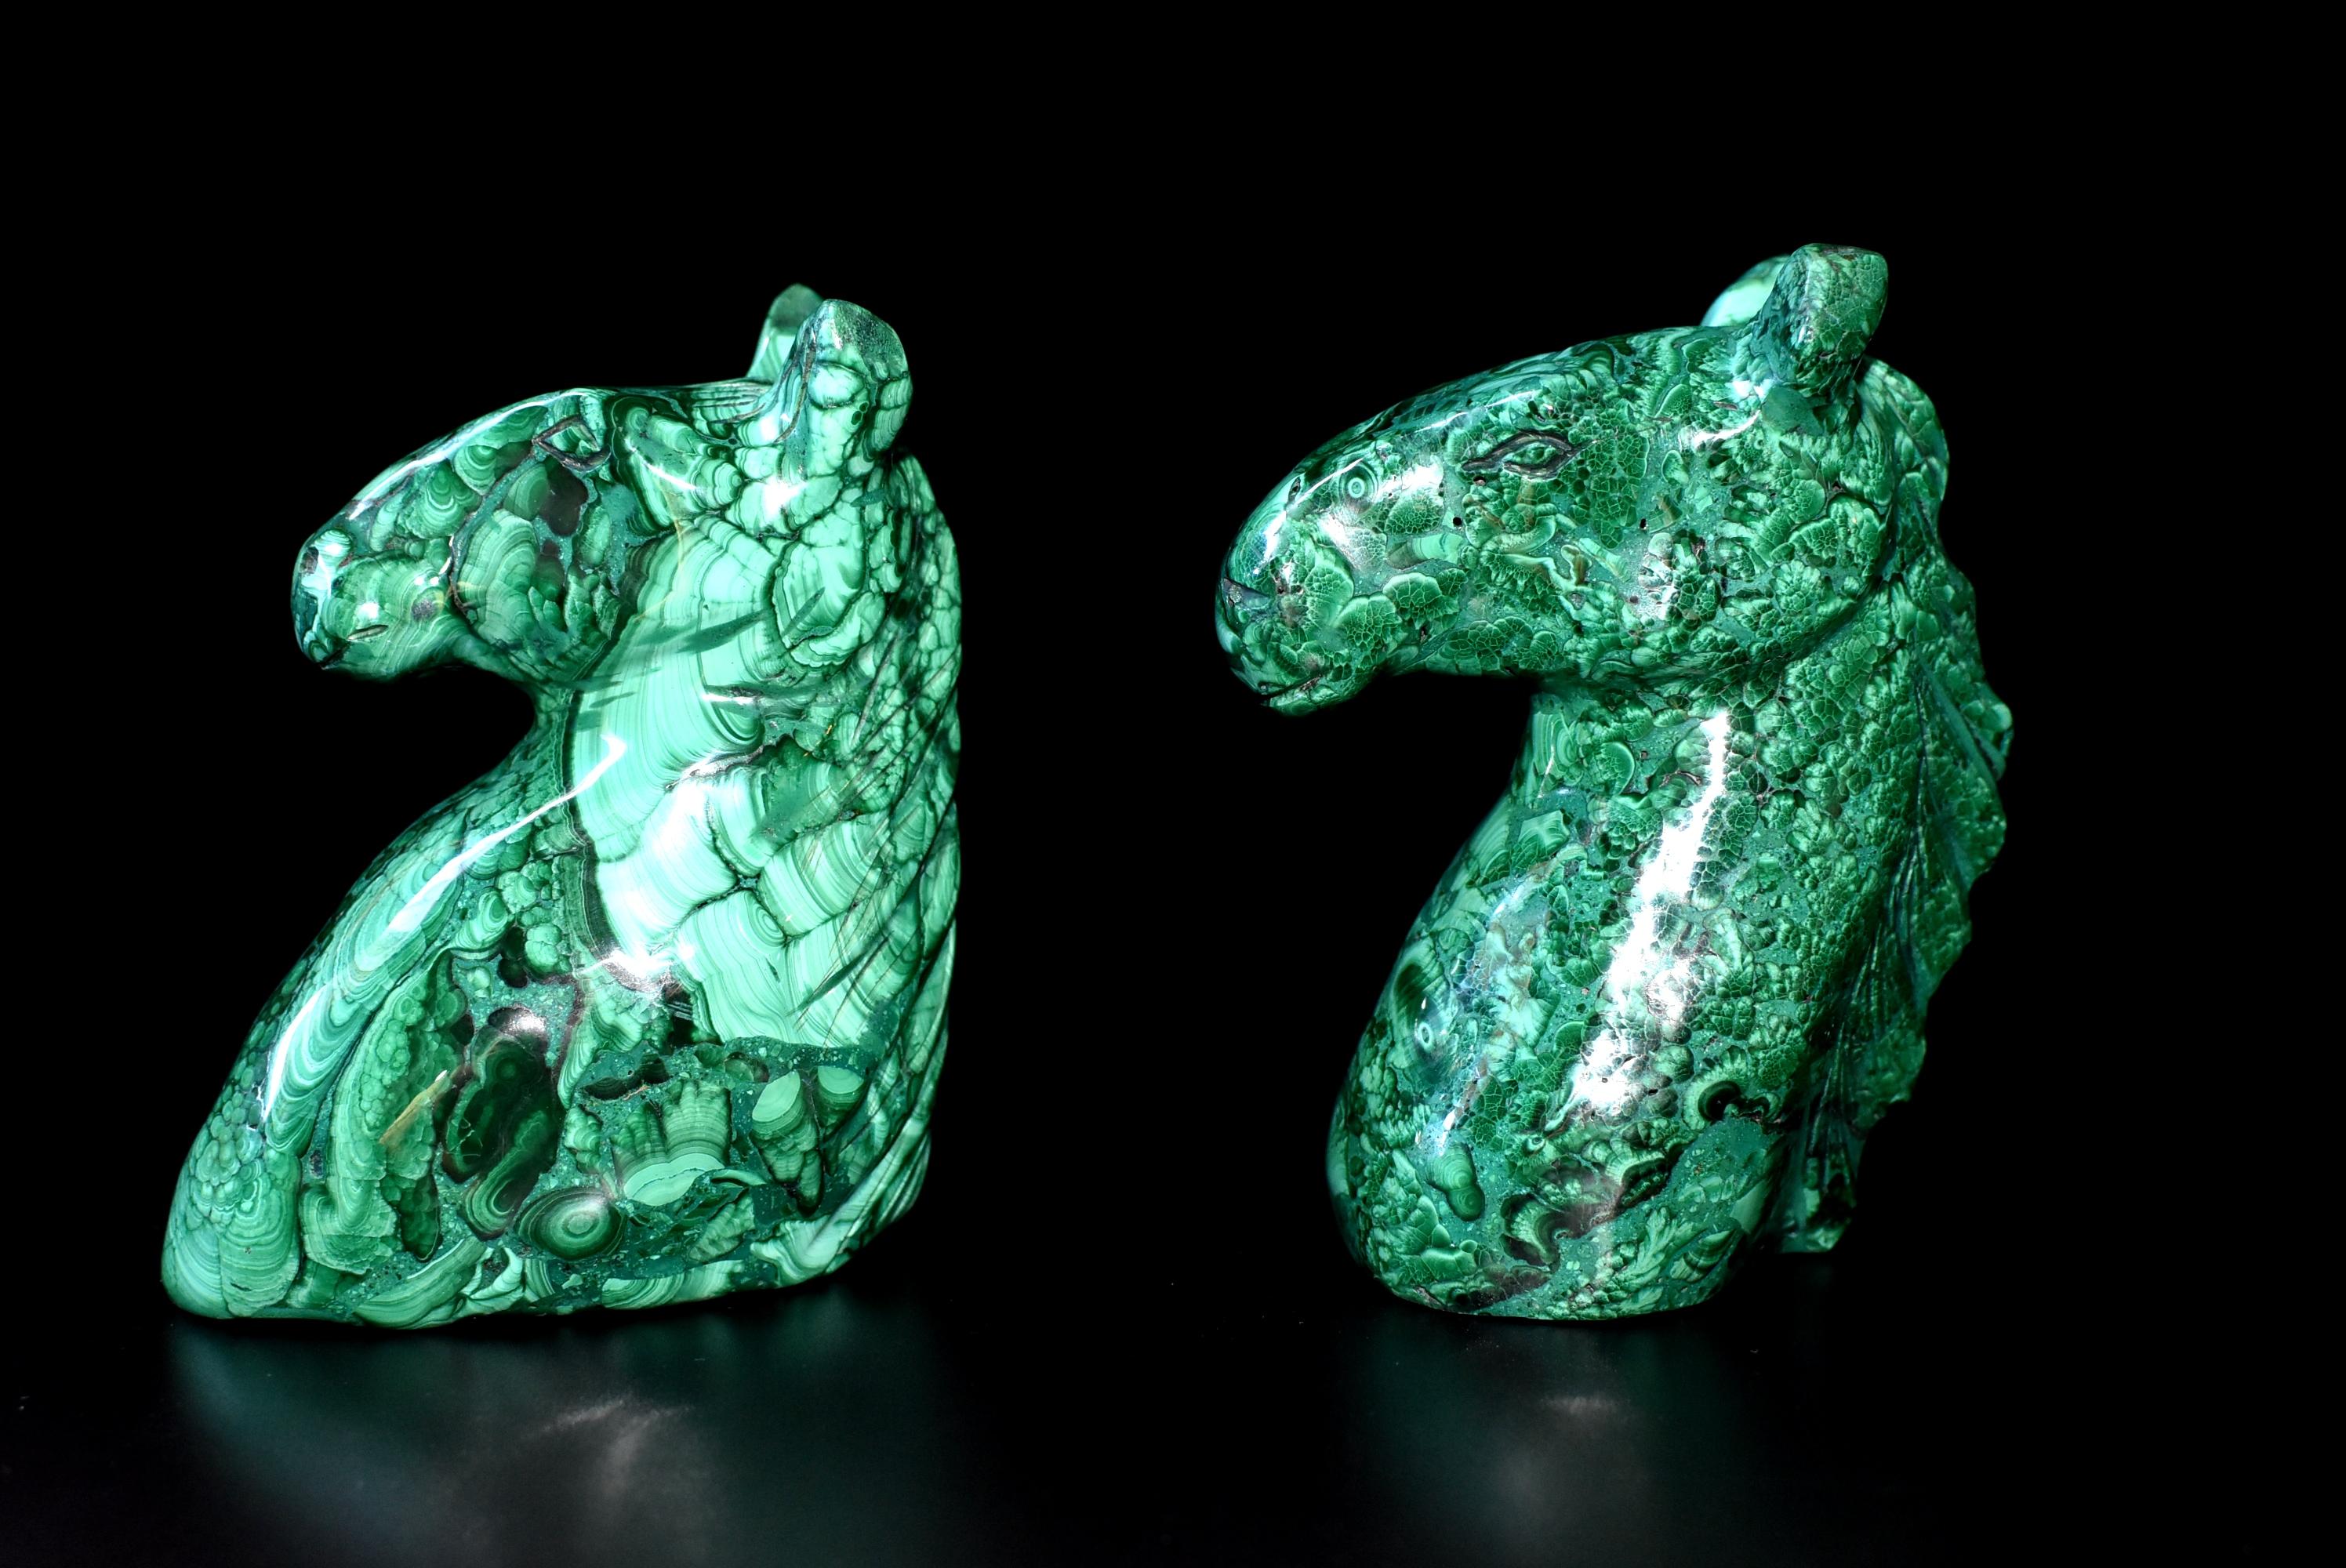 A pair of beautiful horse sculptures in the most spectacular natural malachite. All natural with splendid swirls and patterns, these remarkable pieces make wonderful bookends and paperweights. Malachite is a stone of transformation, helping one